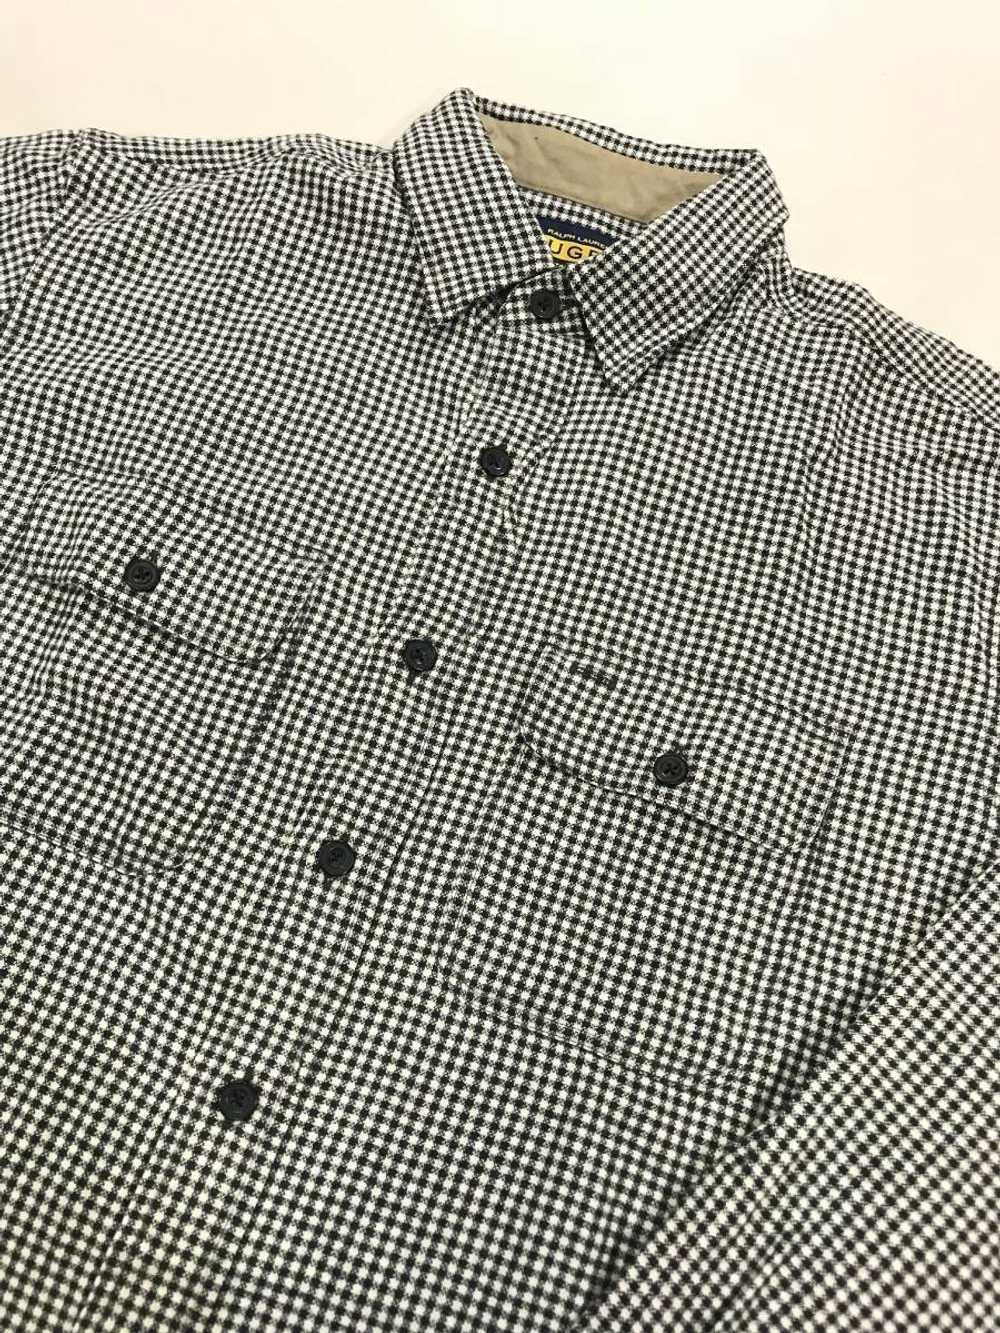 Polo Ralph Lauren - houndstooth rugby polo shirt - image 4